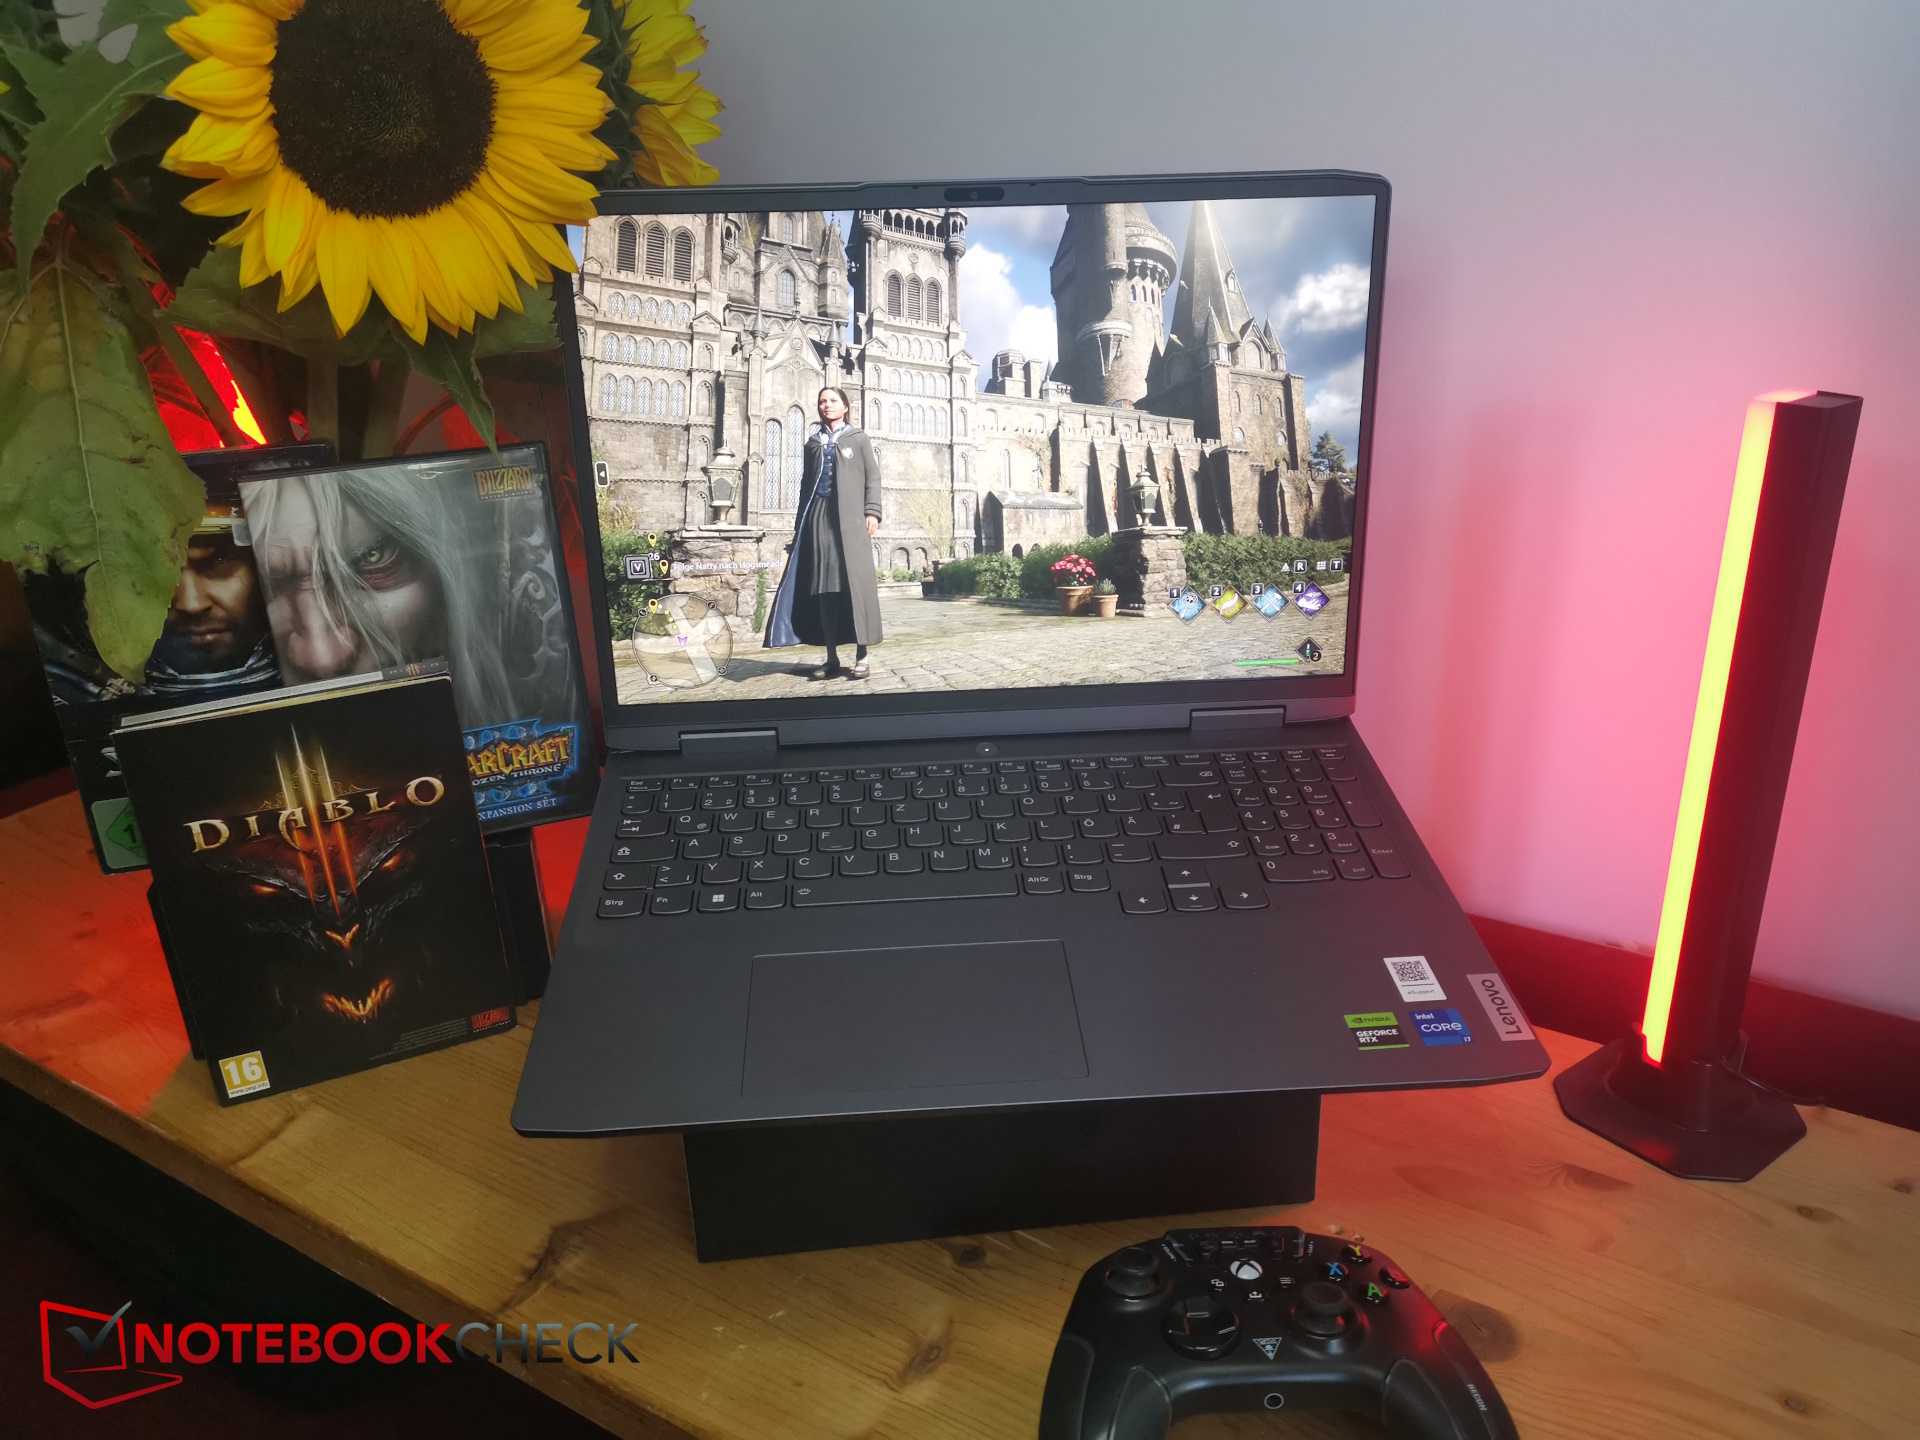 Lenovo LOQ 16 reviewed: A capable gaming laptop at an affordable price